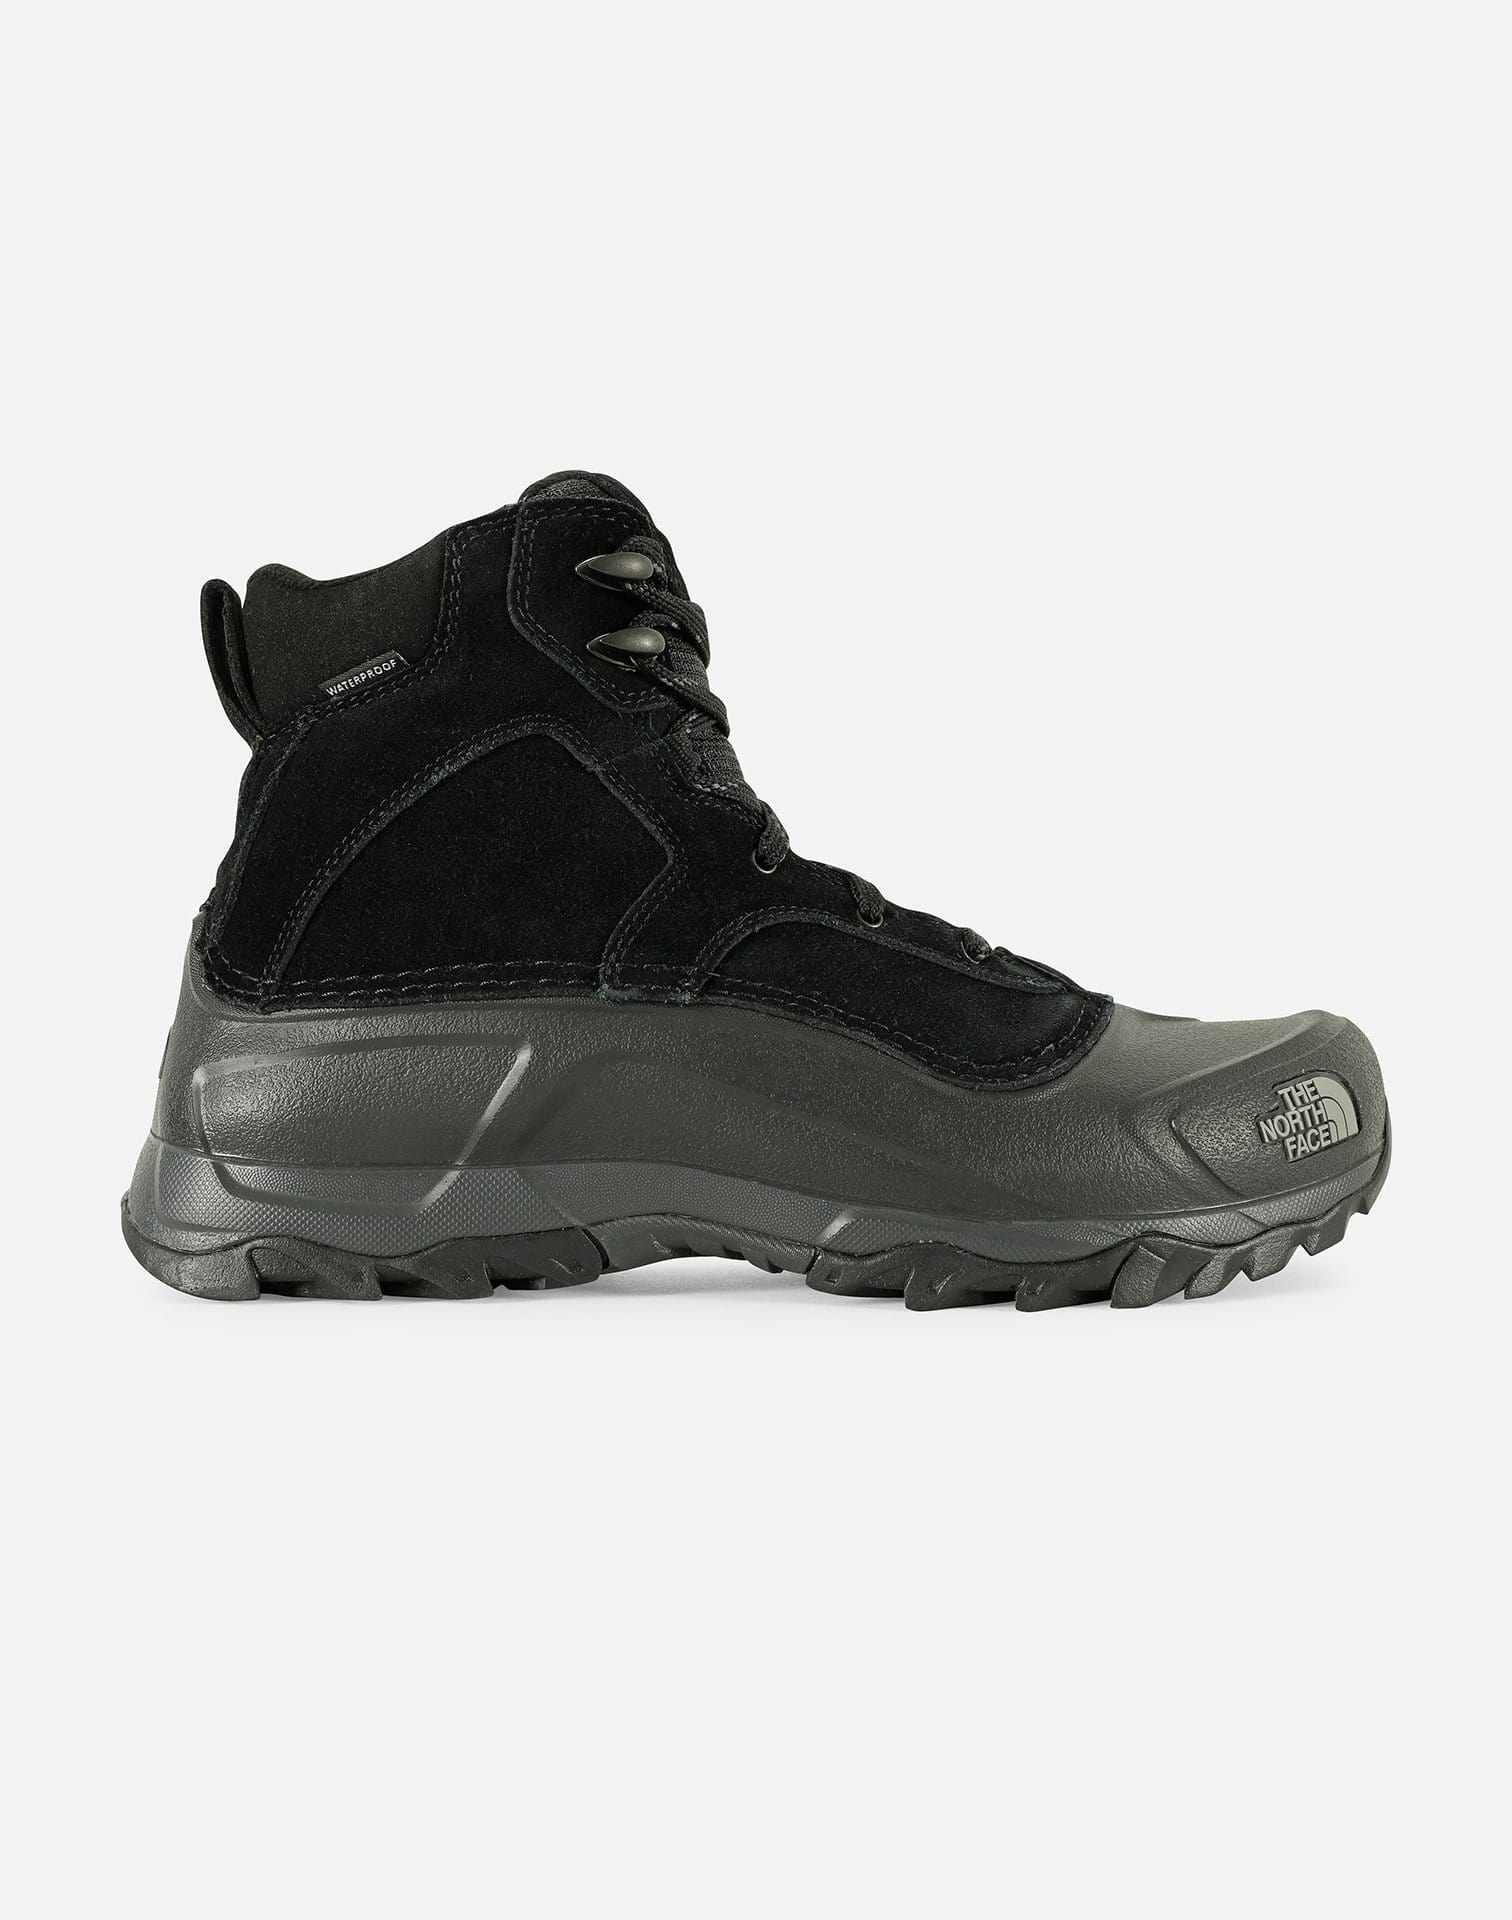 The North Face Men's Snowfuse Boots